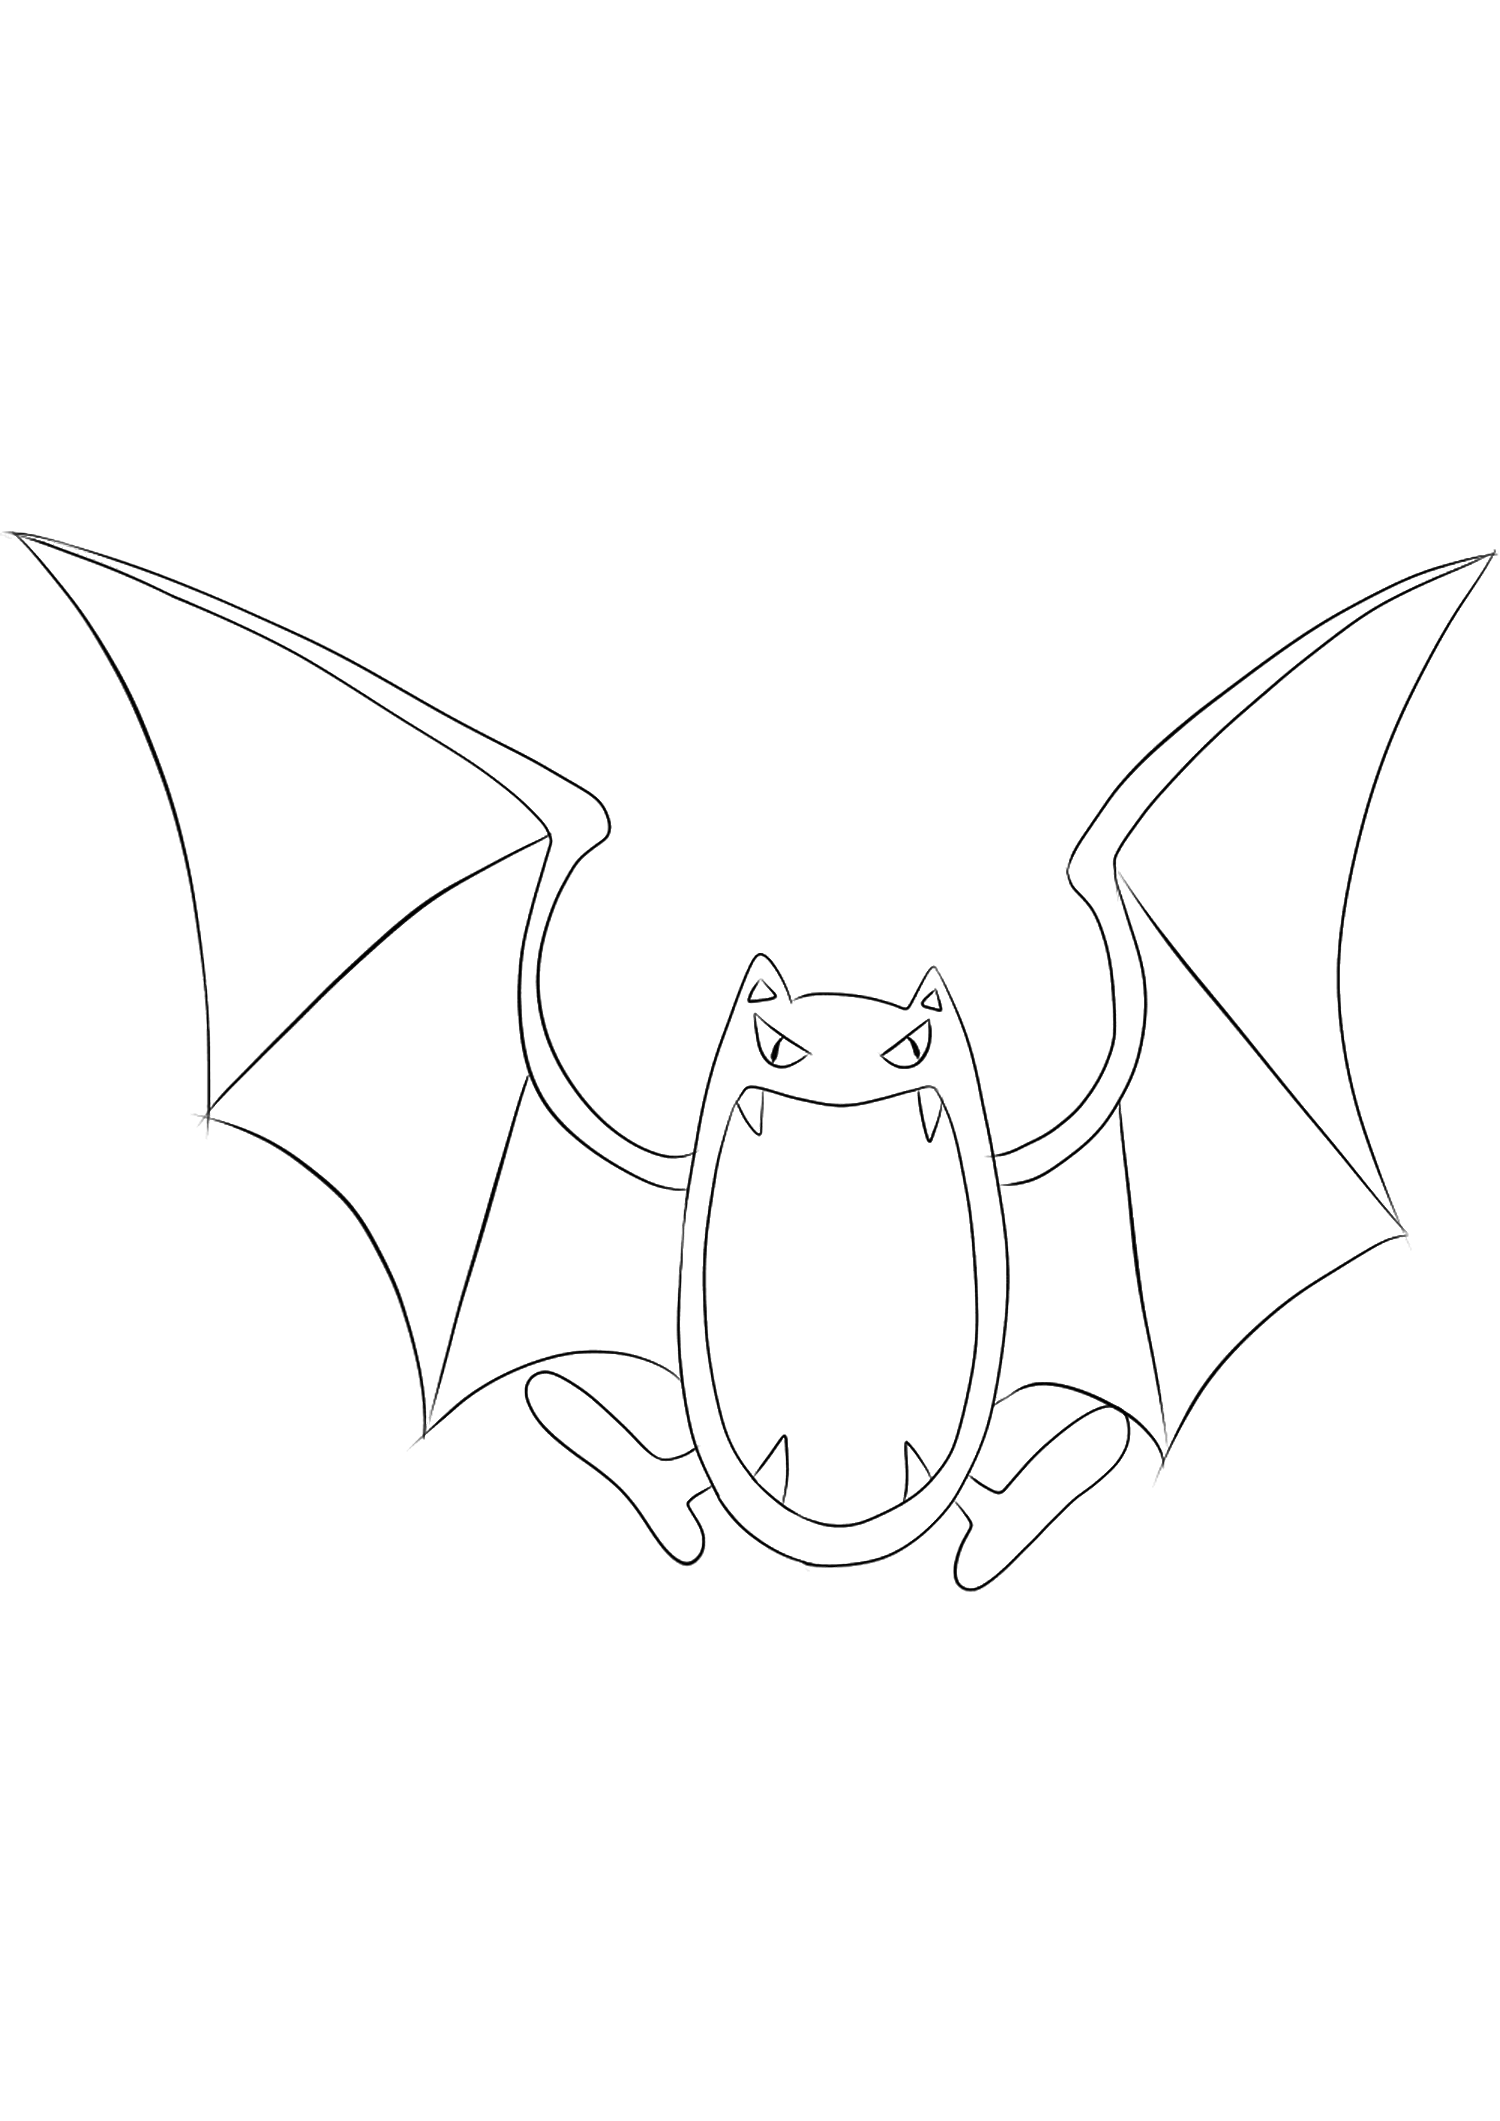 Golbat (No.42). Golbat Coloring page, Generation I Pokemon of type Poison and FlyingOriginal image credit: Pokemon linearts by Lilly Gerbil'font-size:smaller;color:gray'>Permission: All rights reserved © Pokemon company and Ken Sugimori.